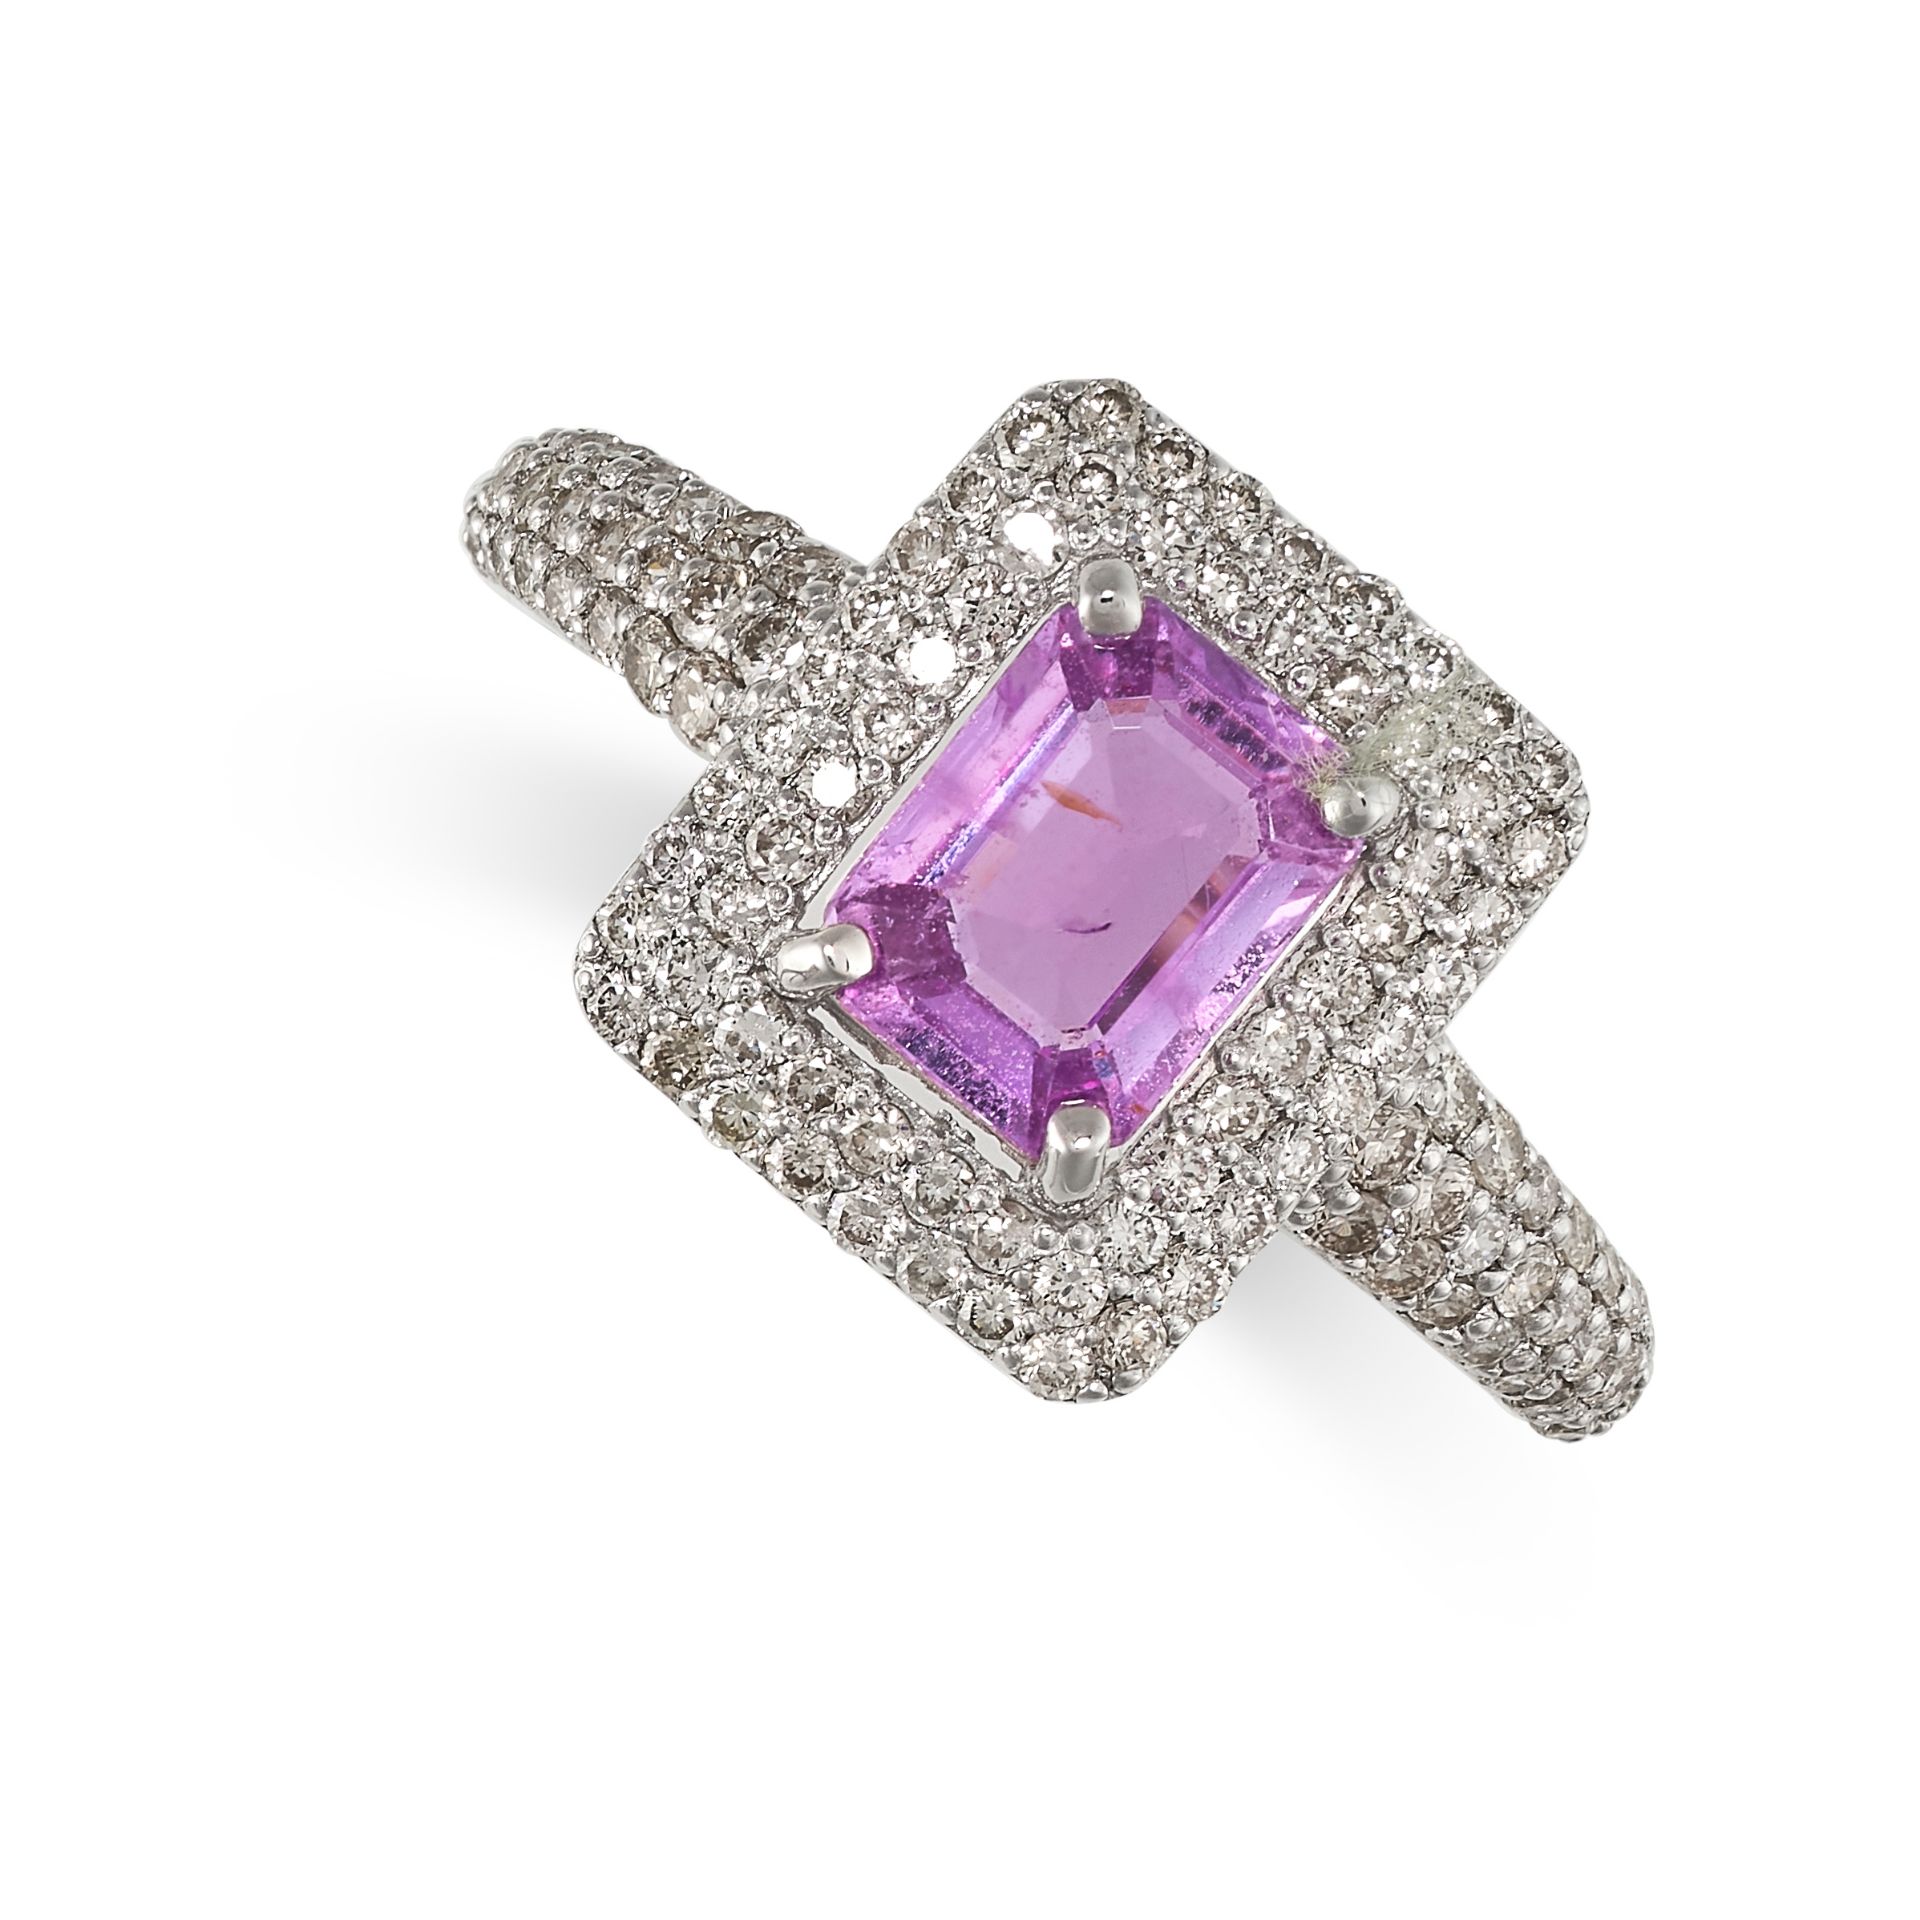 A PINK SAPPHIRE AND DIAMOND RING in 18ct white gold, set with a step cut pink sapphire of 0.85